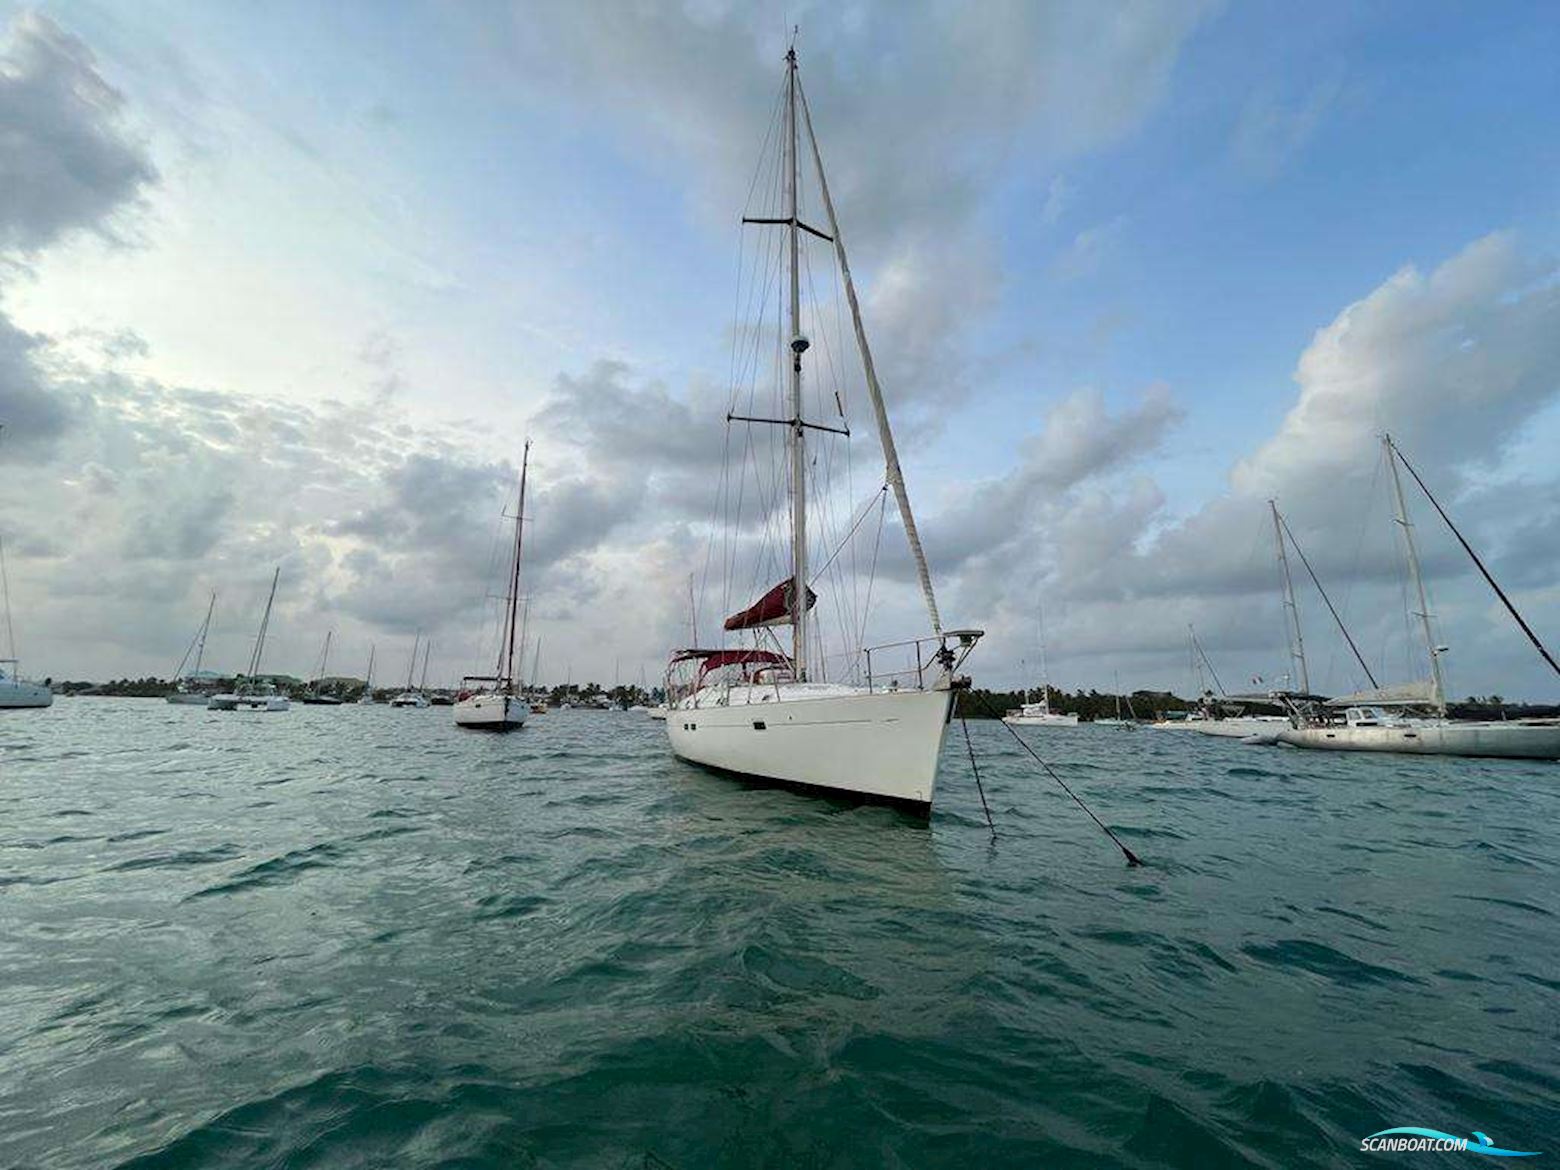 Beneteau Oceanis 411 Clipper Sailing boat 1999, with Volvo D2-55 engine, Martinique